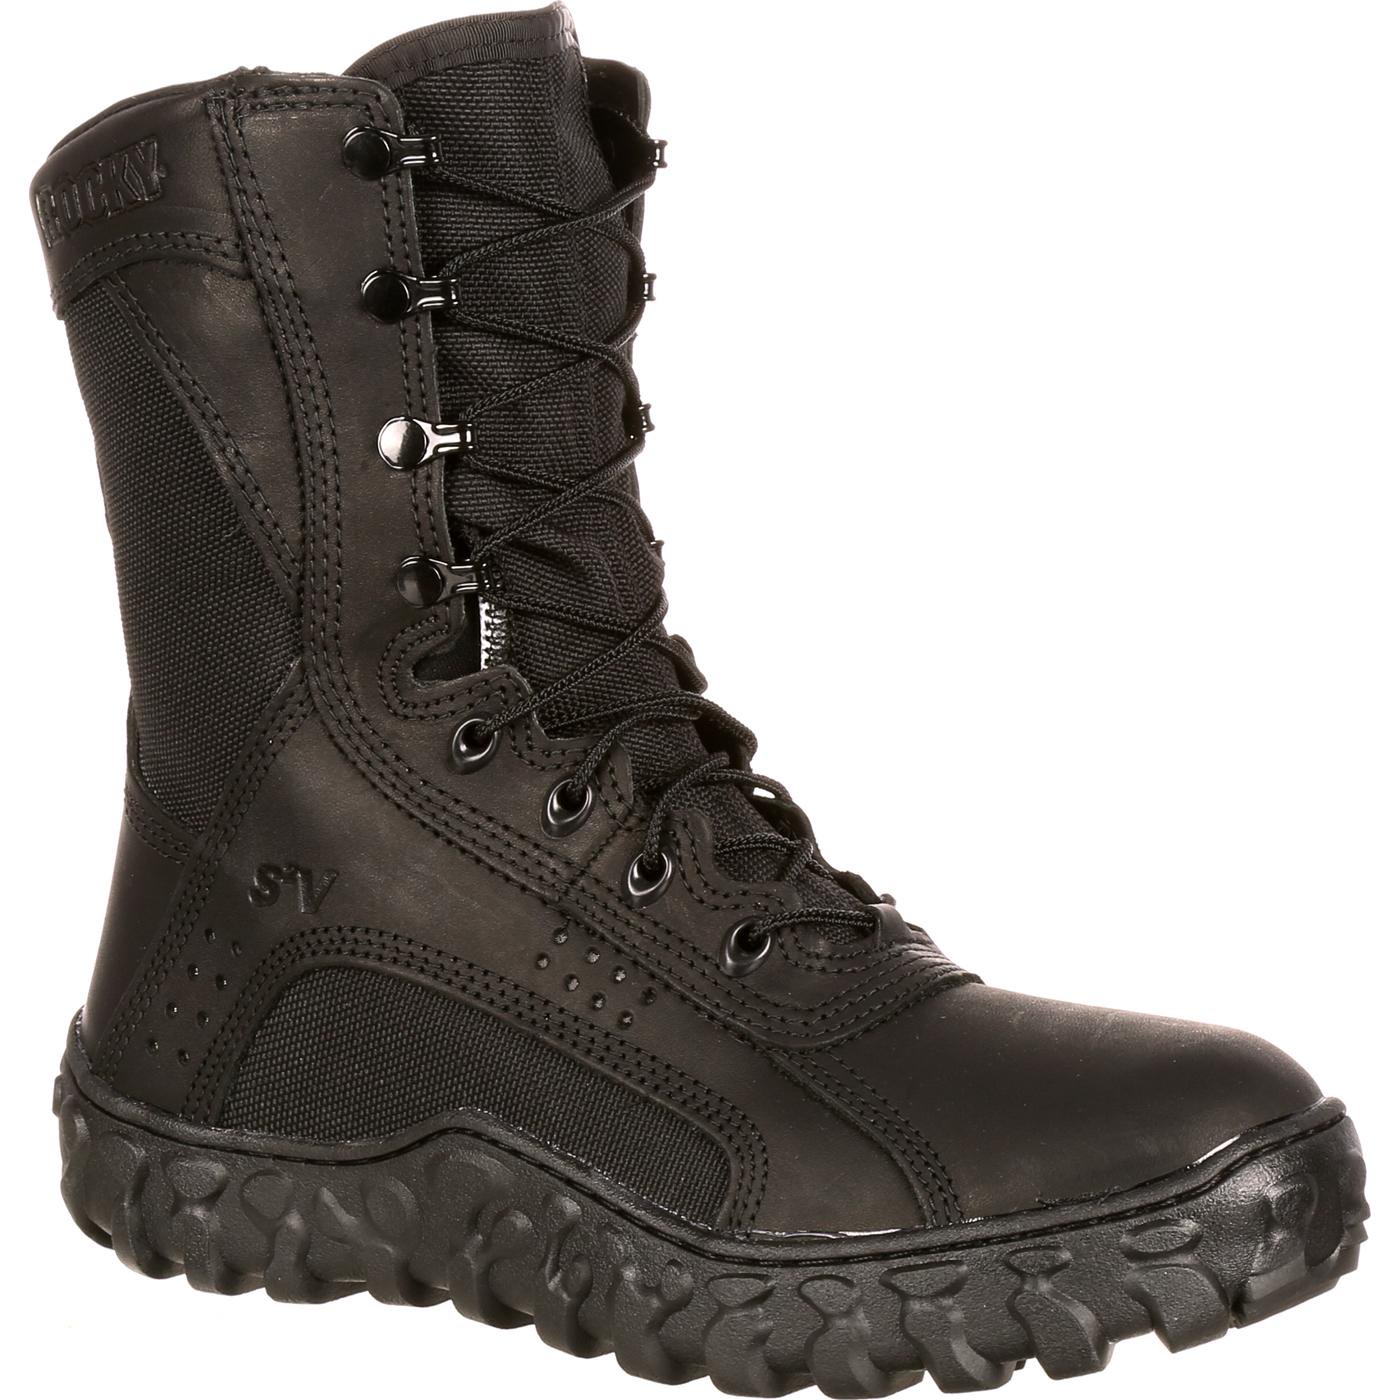 American-Made Black Military Boots, Rocky S2V FQ0000102